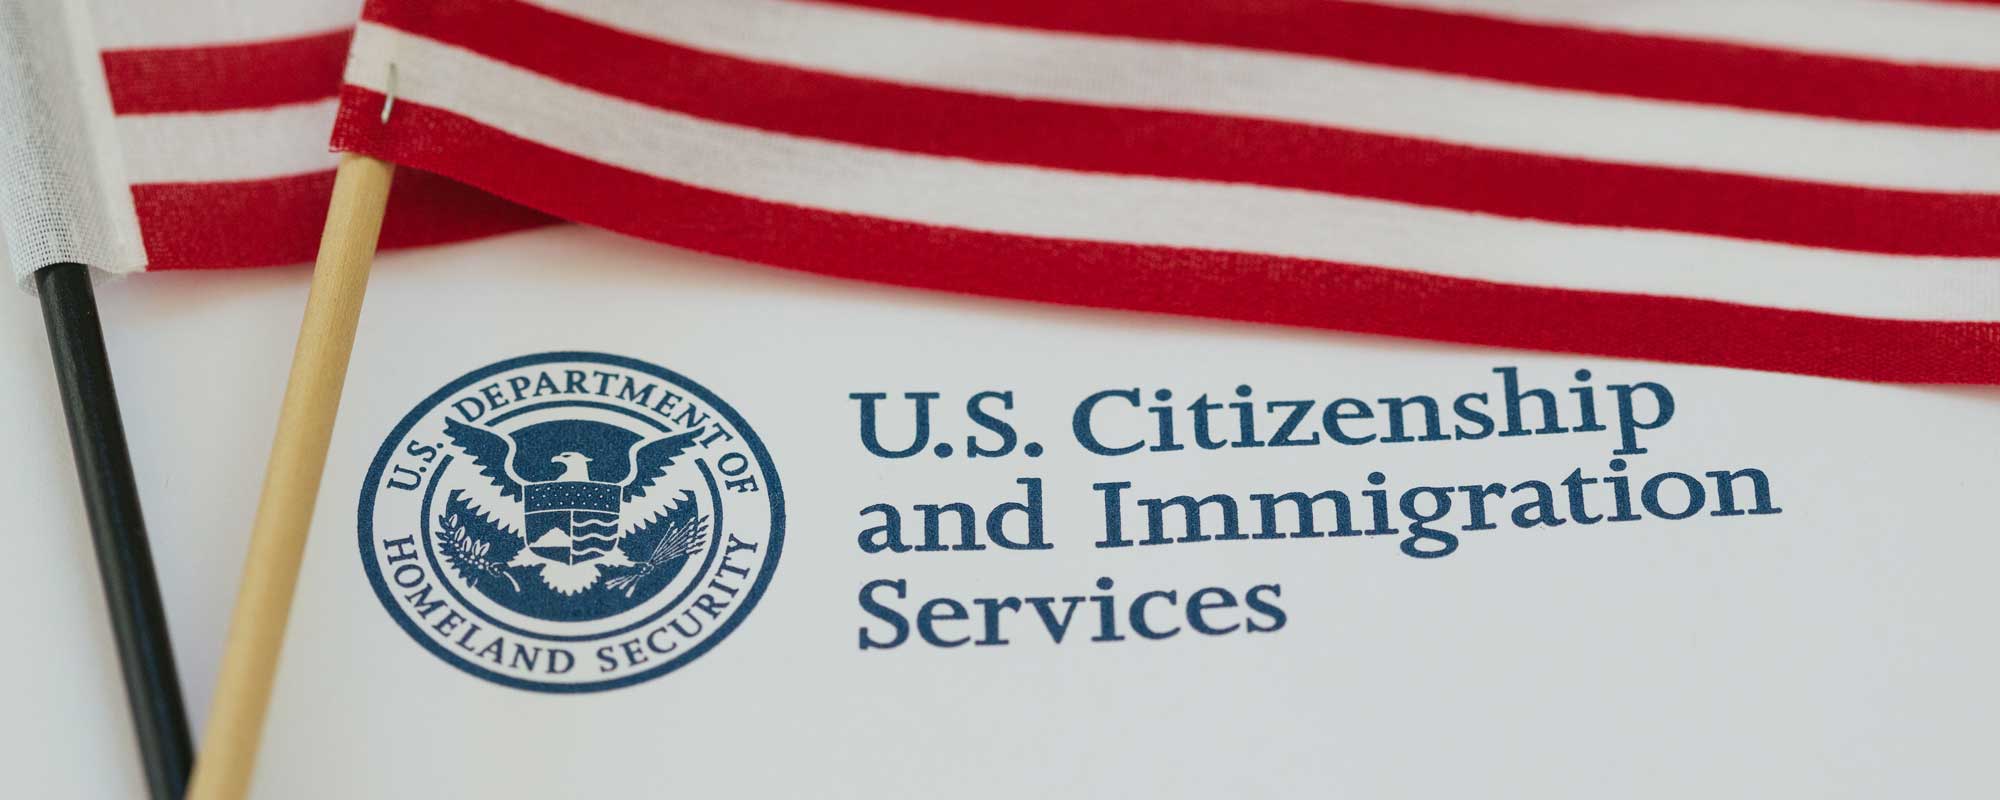 Citizenship and immigration document